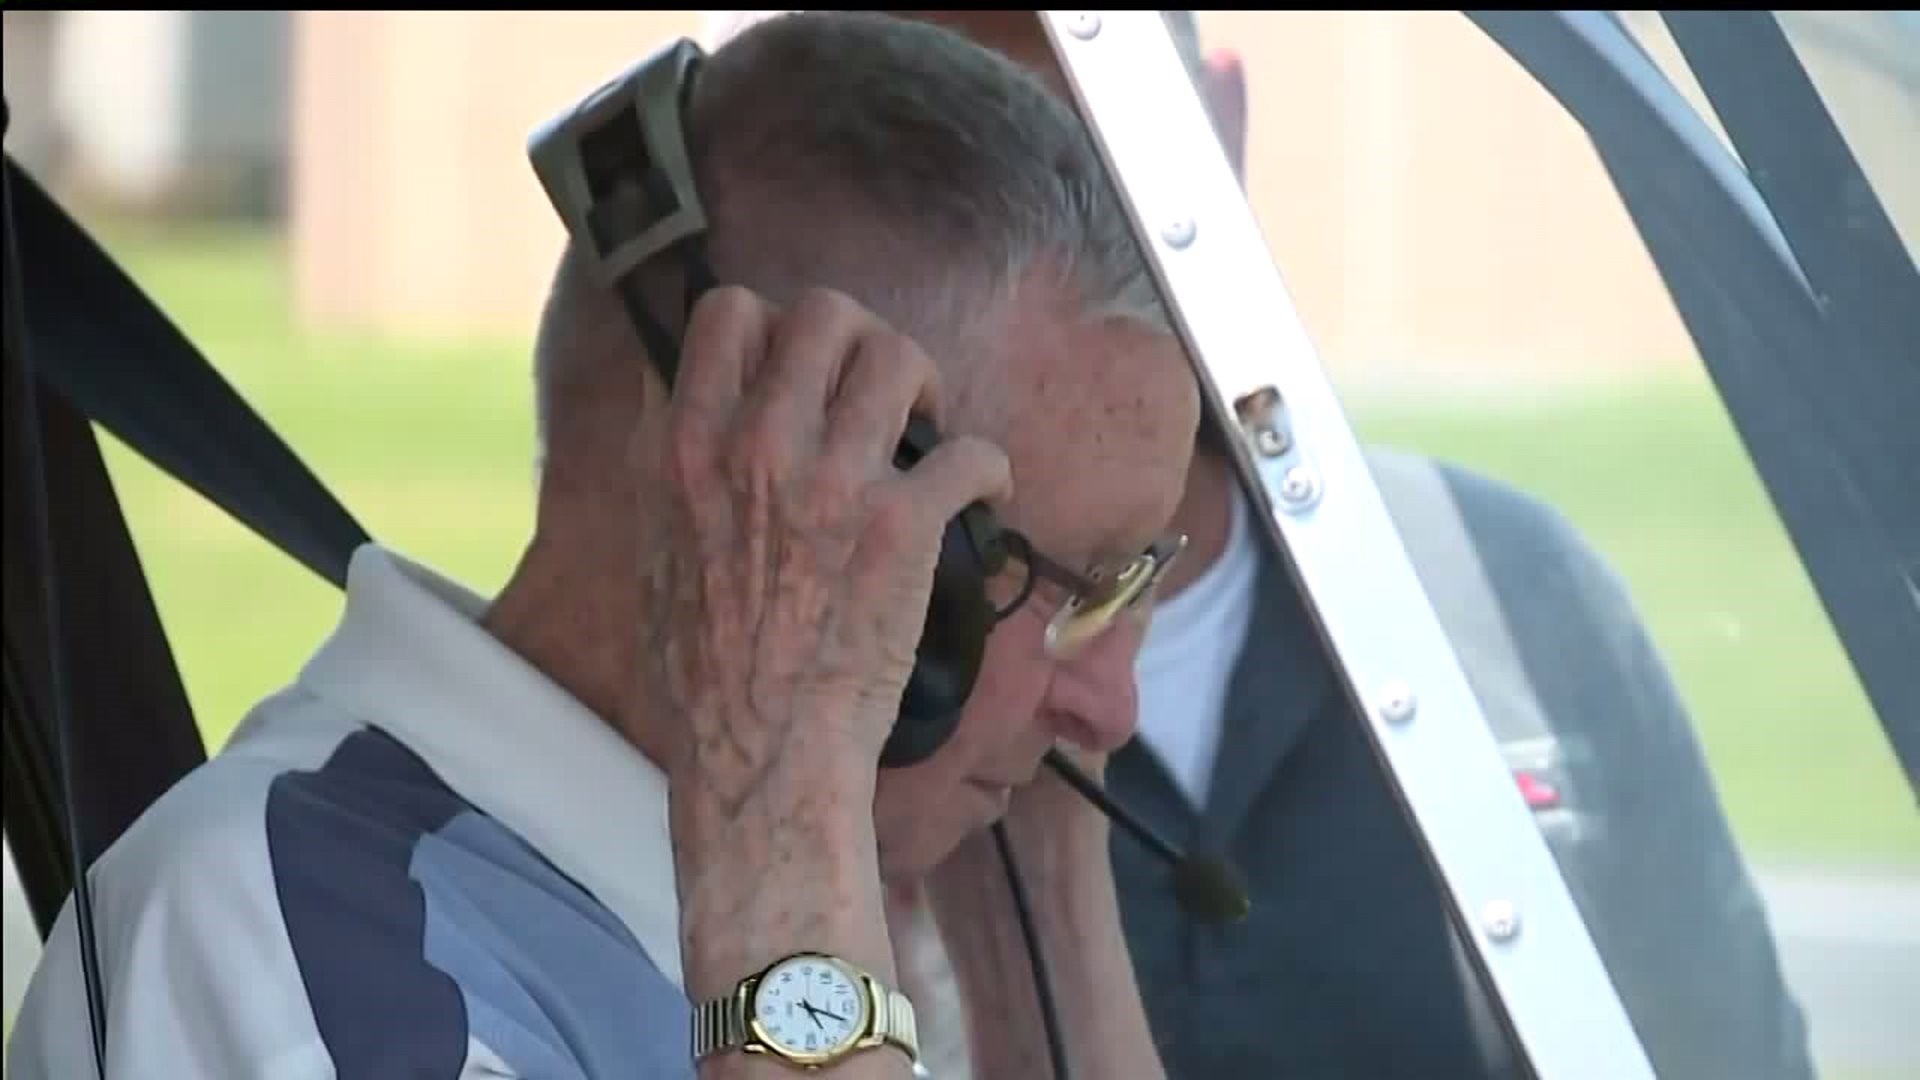 96-year-old veteran rides in helicopter